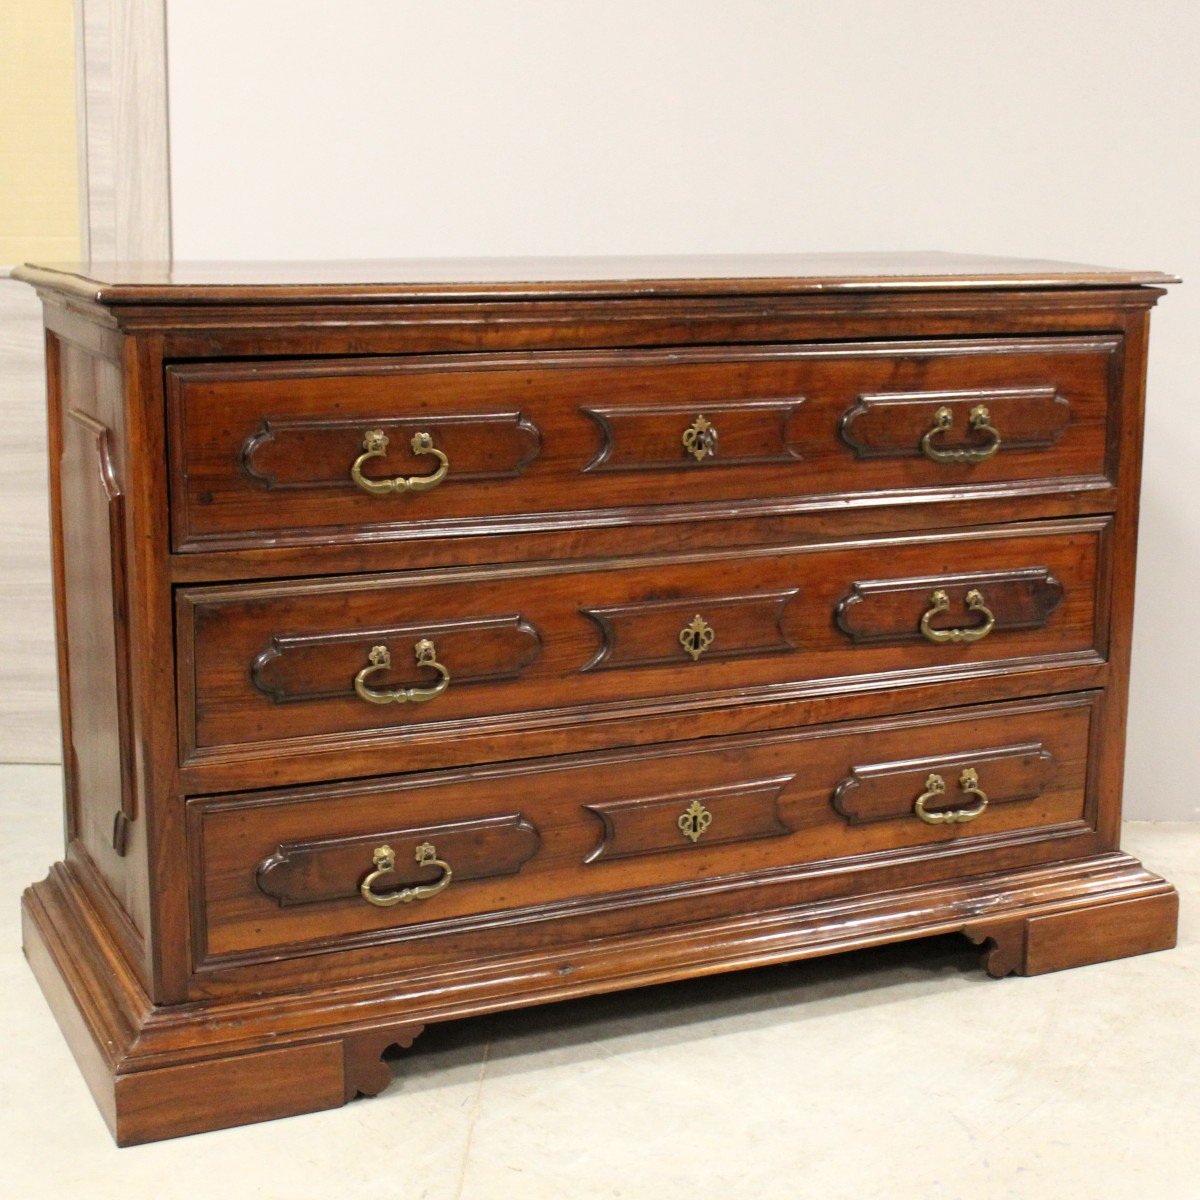 Antique Dresser Chest Of Drawers Canterano In Walnut – Italy 17th